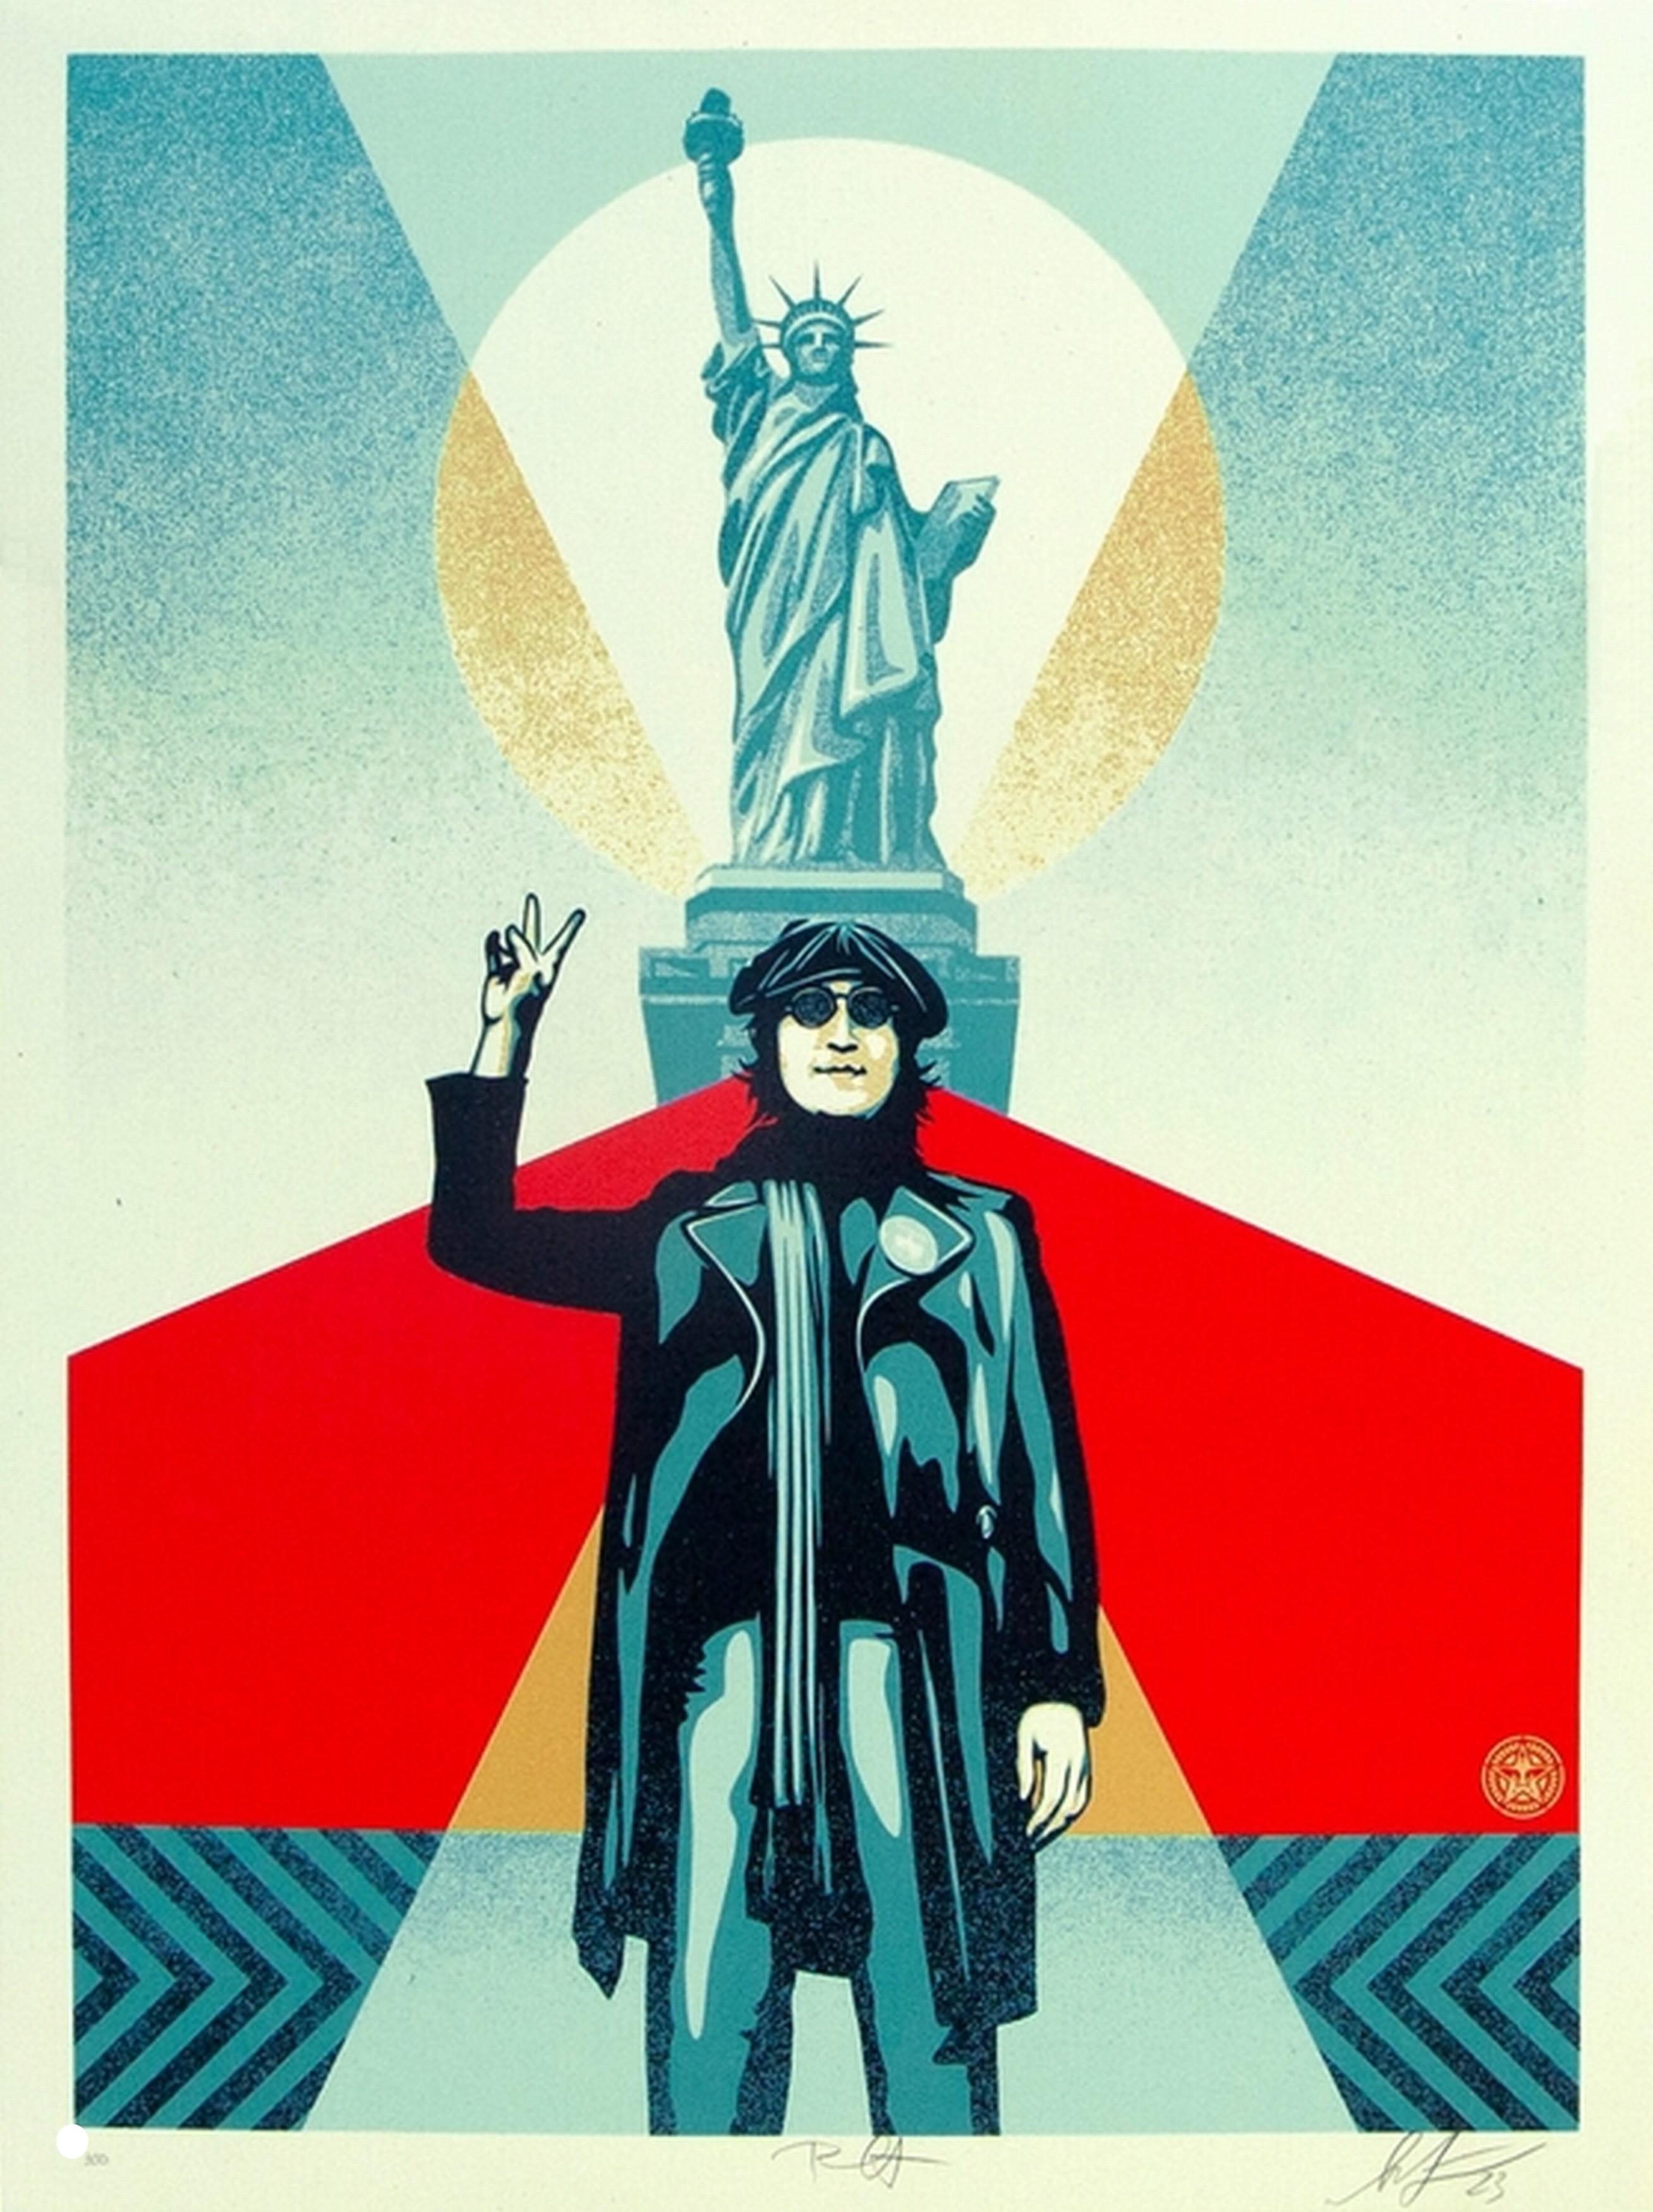 Lennon Peace and Liberty (Red) (WAR IS OVER, Peace, Vietnam War, Yoko Ono) - Print by Shepard Fairey